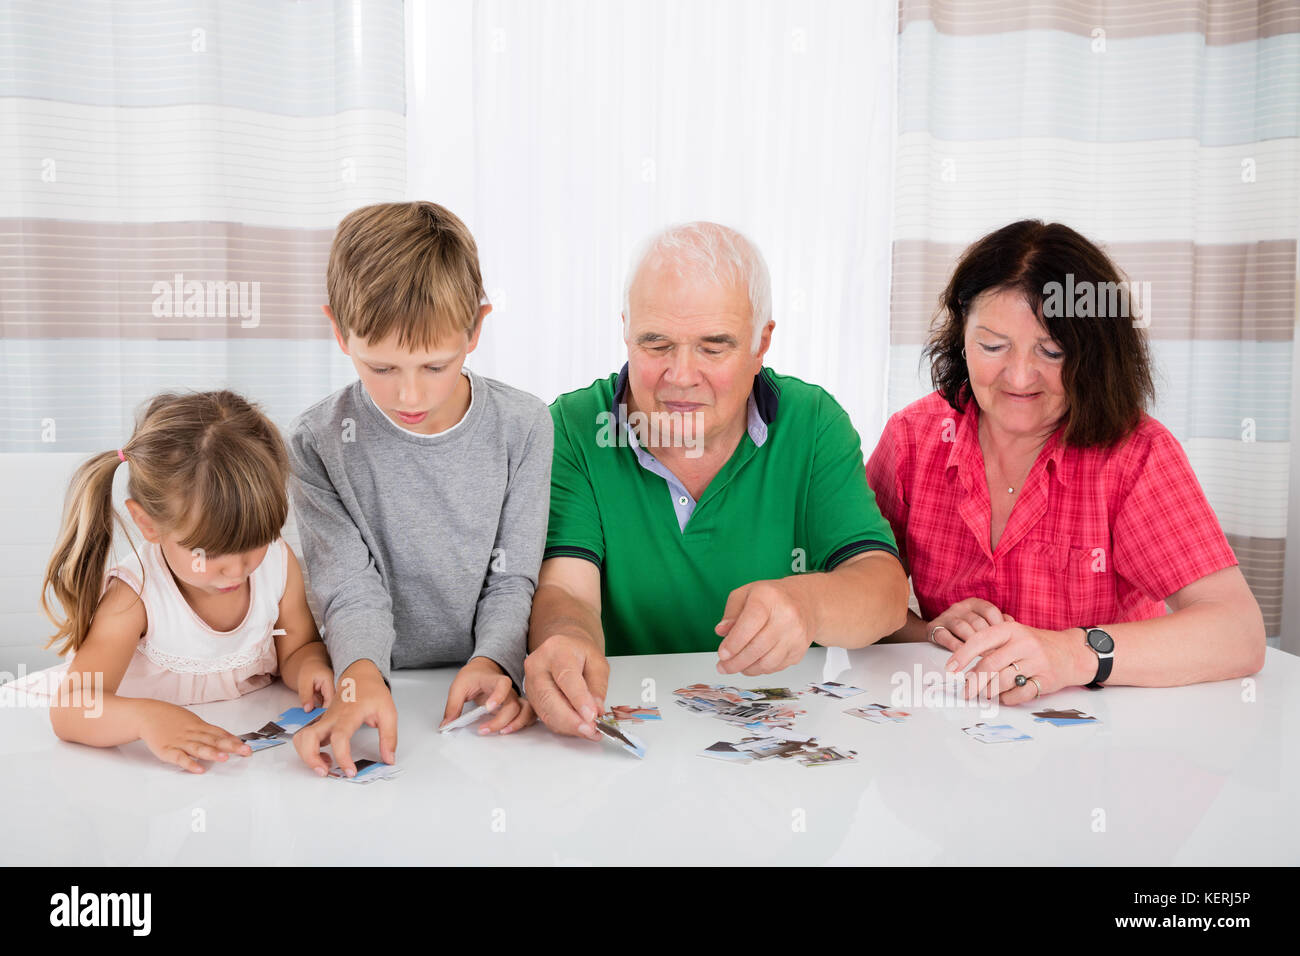 Family Holding Jigsaw Puzzle Pieces While Playing Game Stock Photo